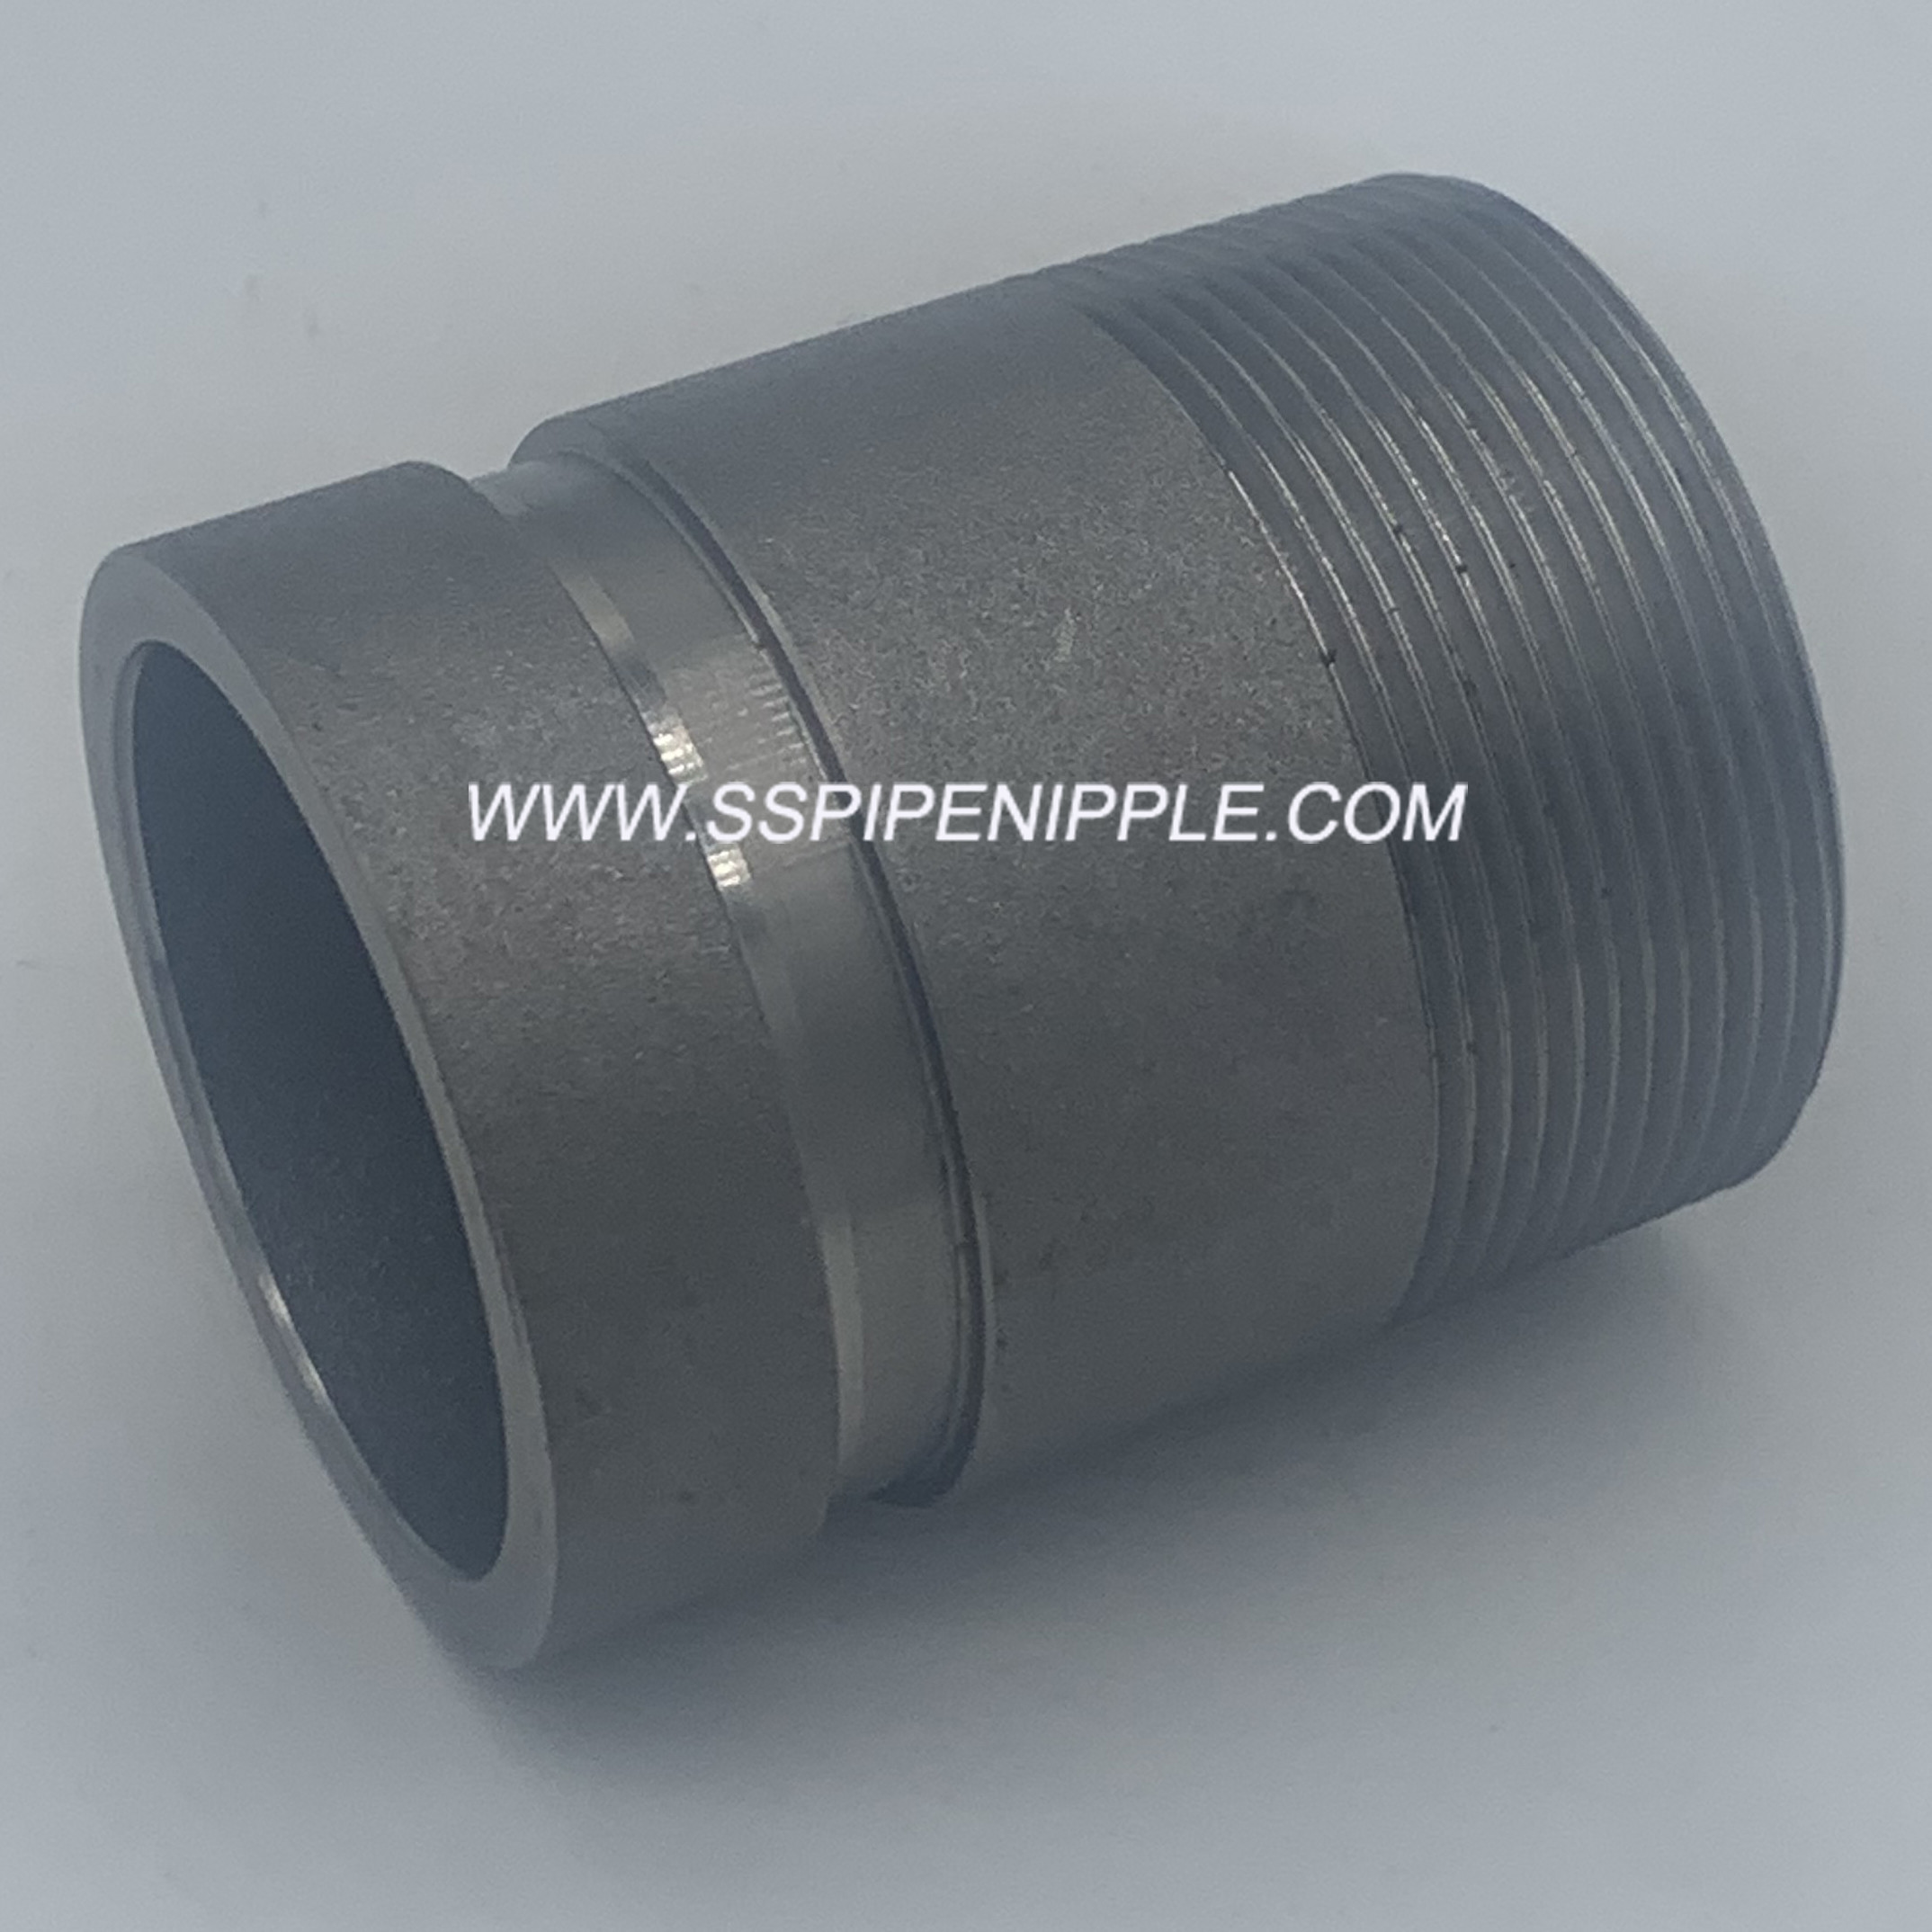 Round 2X12 Grooved End Pipe Fittings SCH80 ASTM A106  ASME B1.20.1